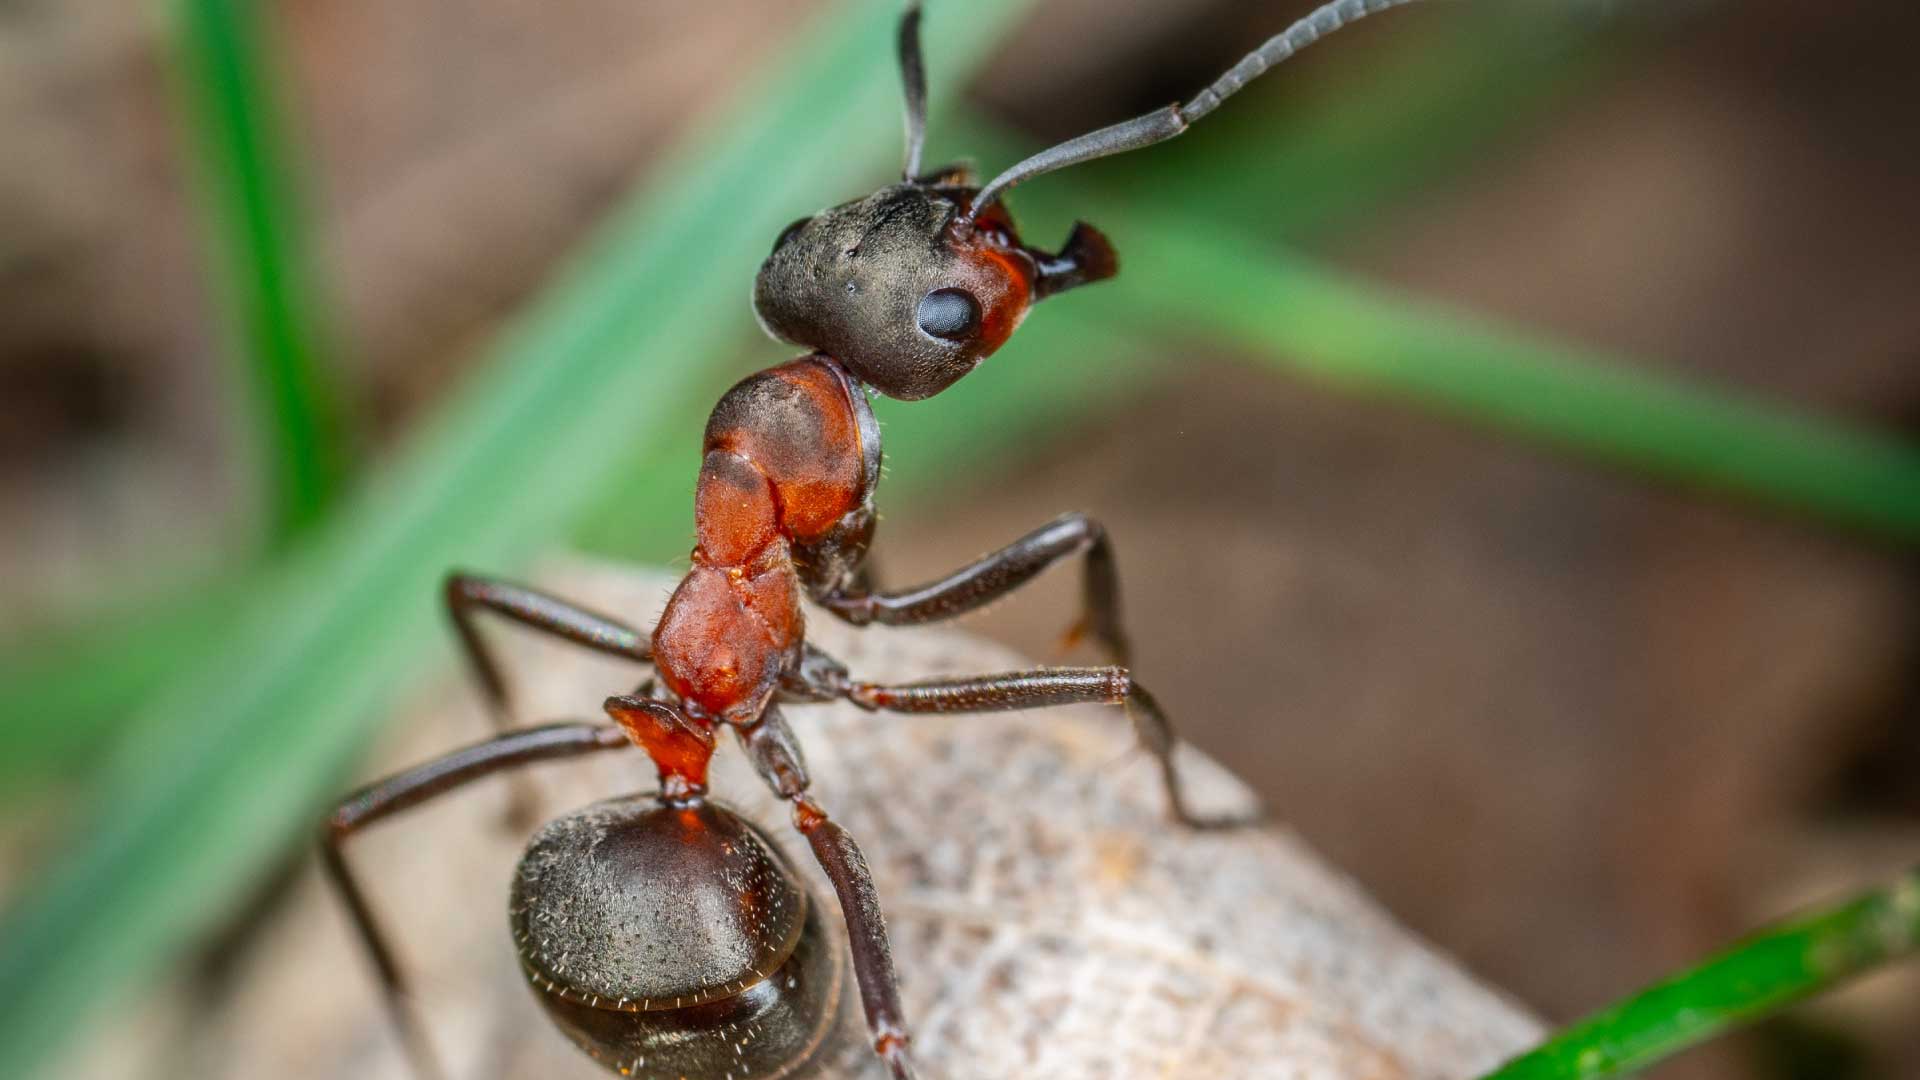 The Red Ants Have Reached Europe: What You Need To Know